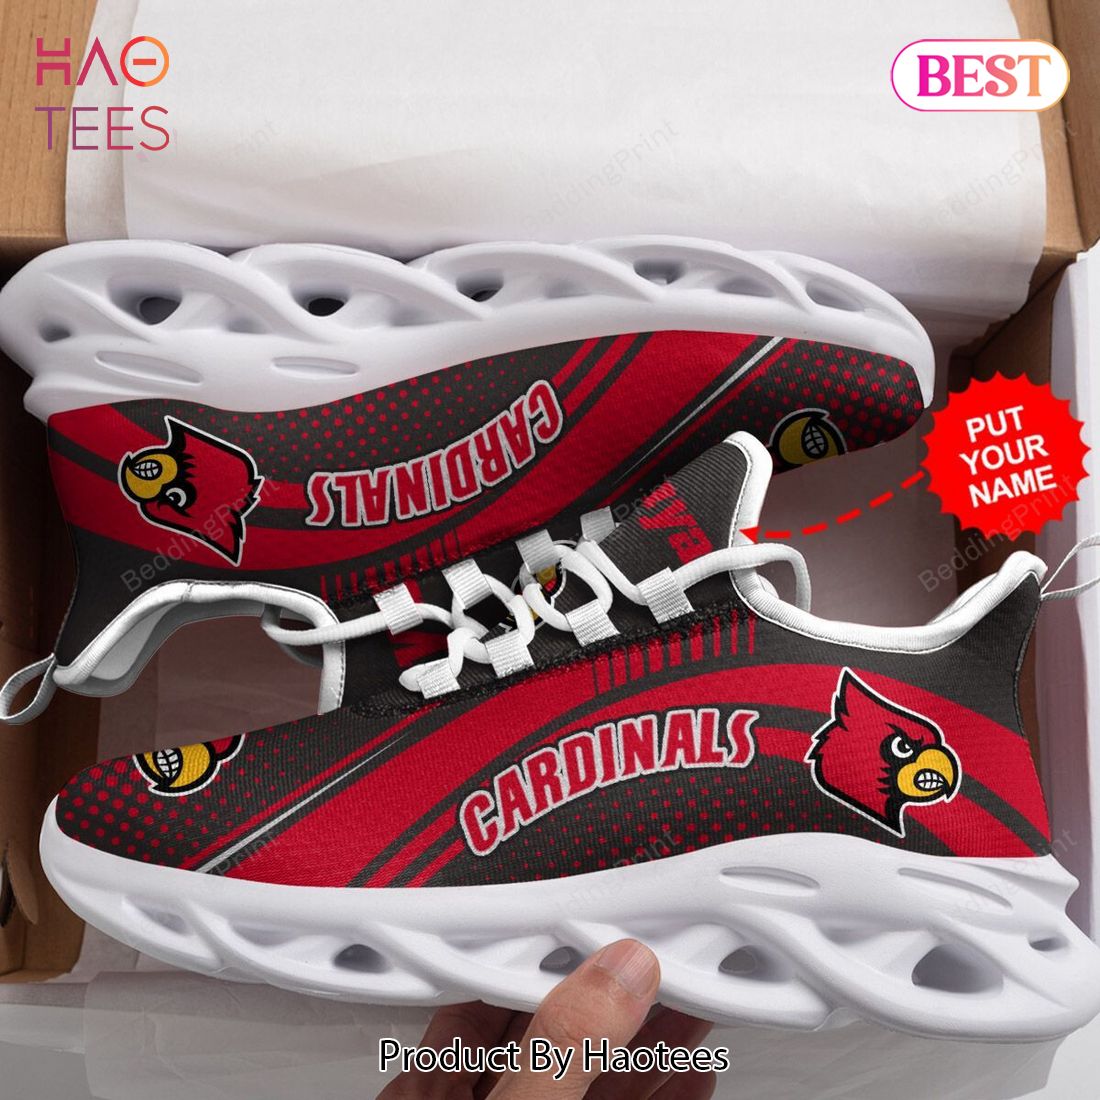 NCAA Louisville Cardinals Custom Name Red Max Sole Sneakers Shoes